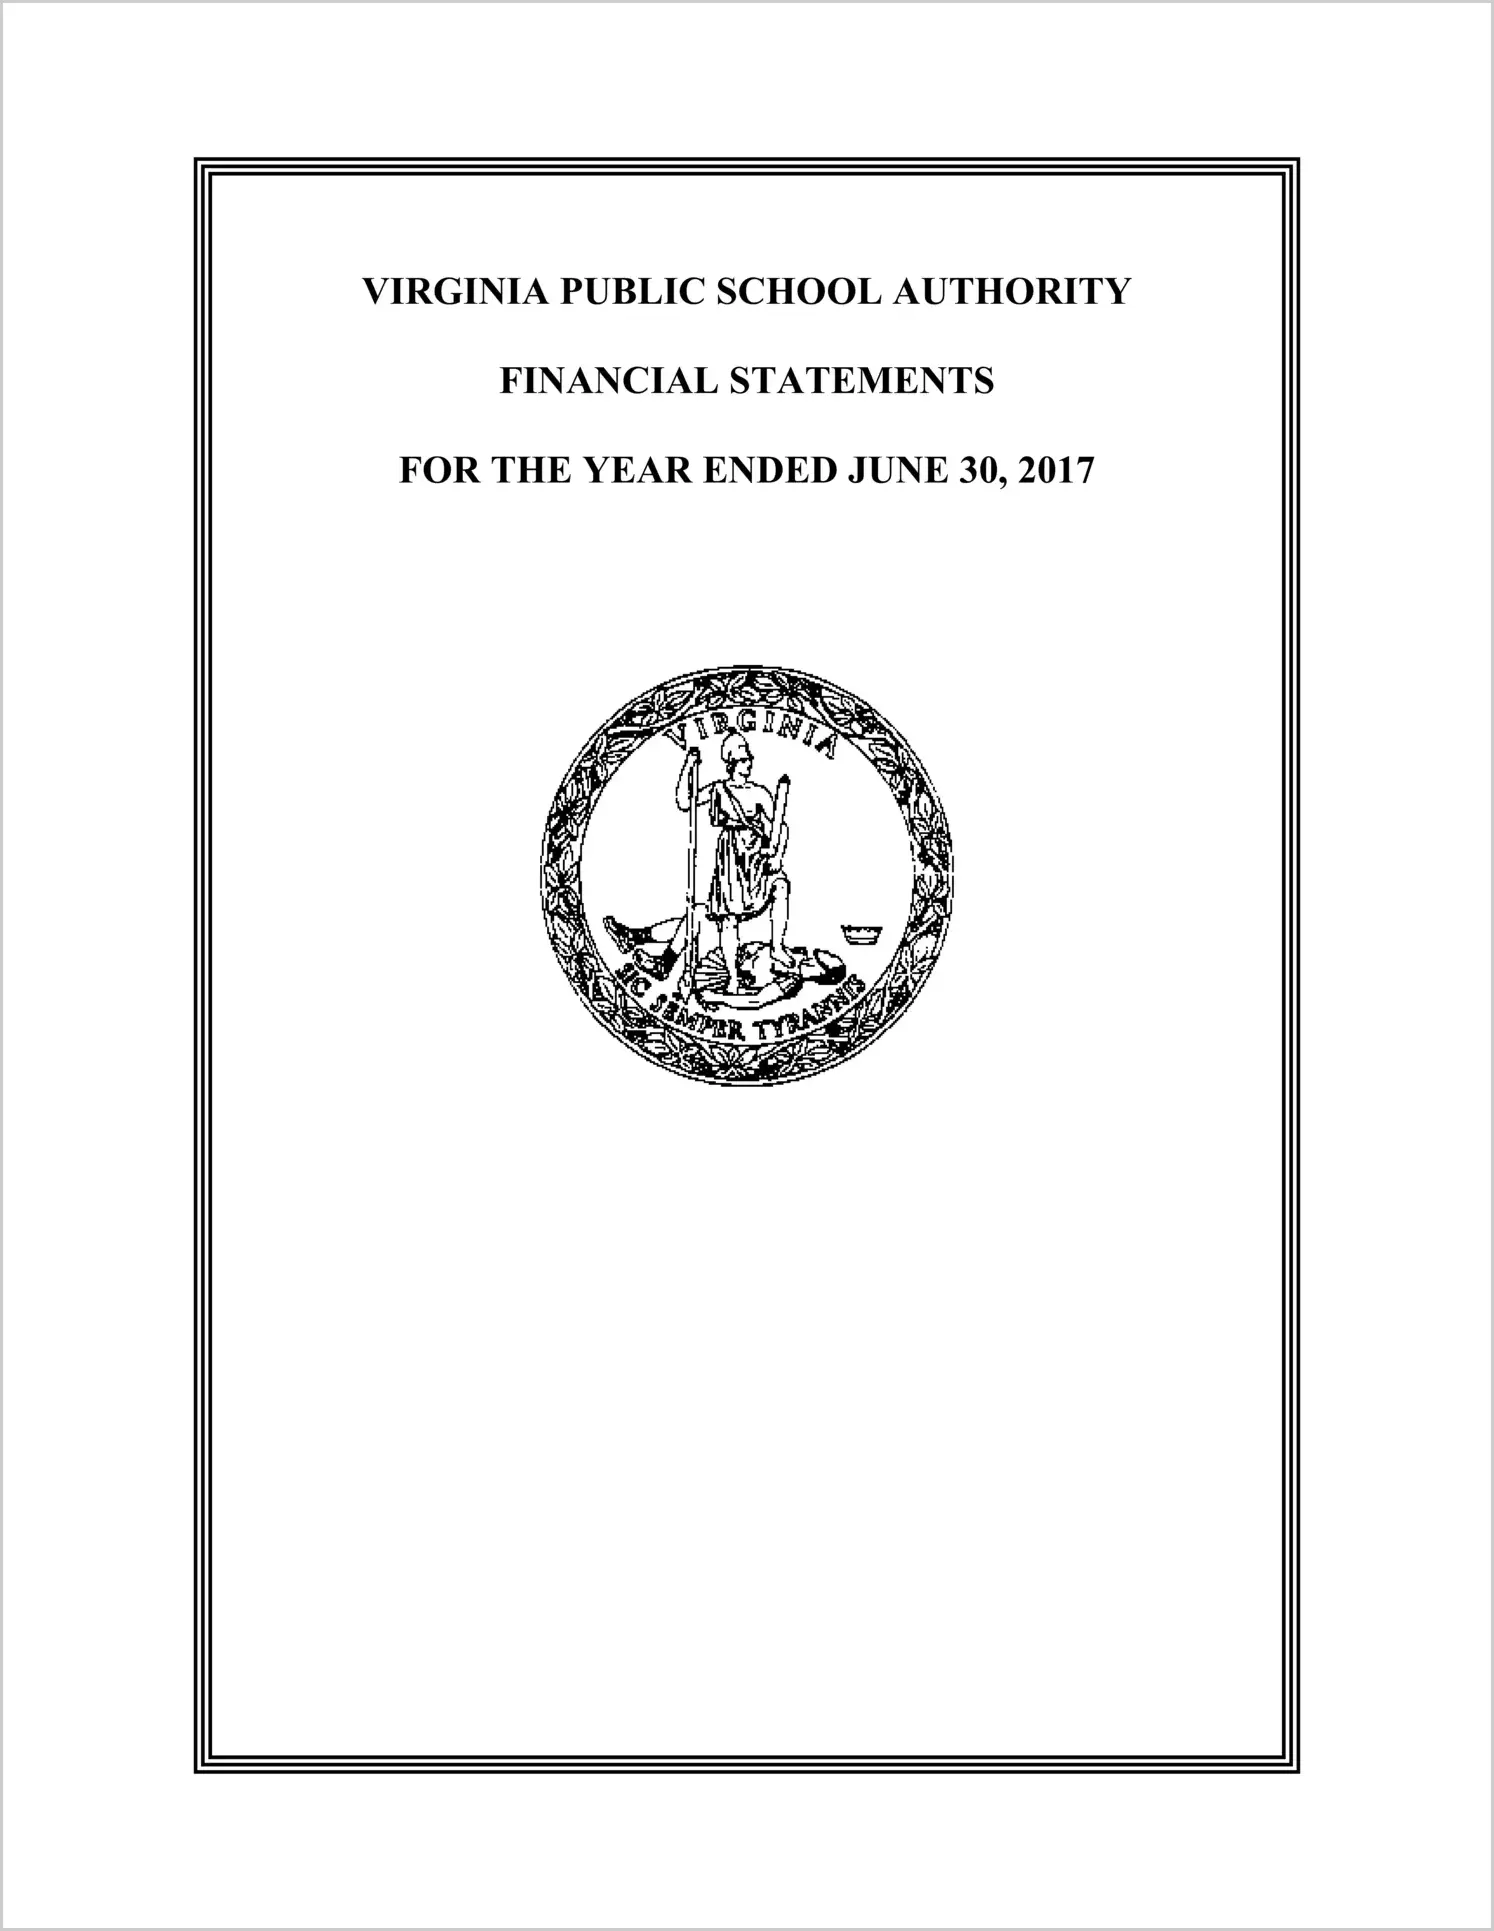 Virginia Public School Authority Financial Statements for the year ended June 30, 2017